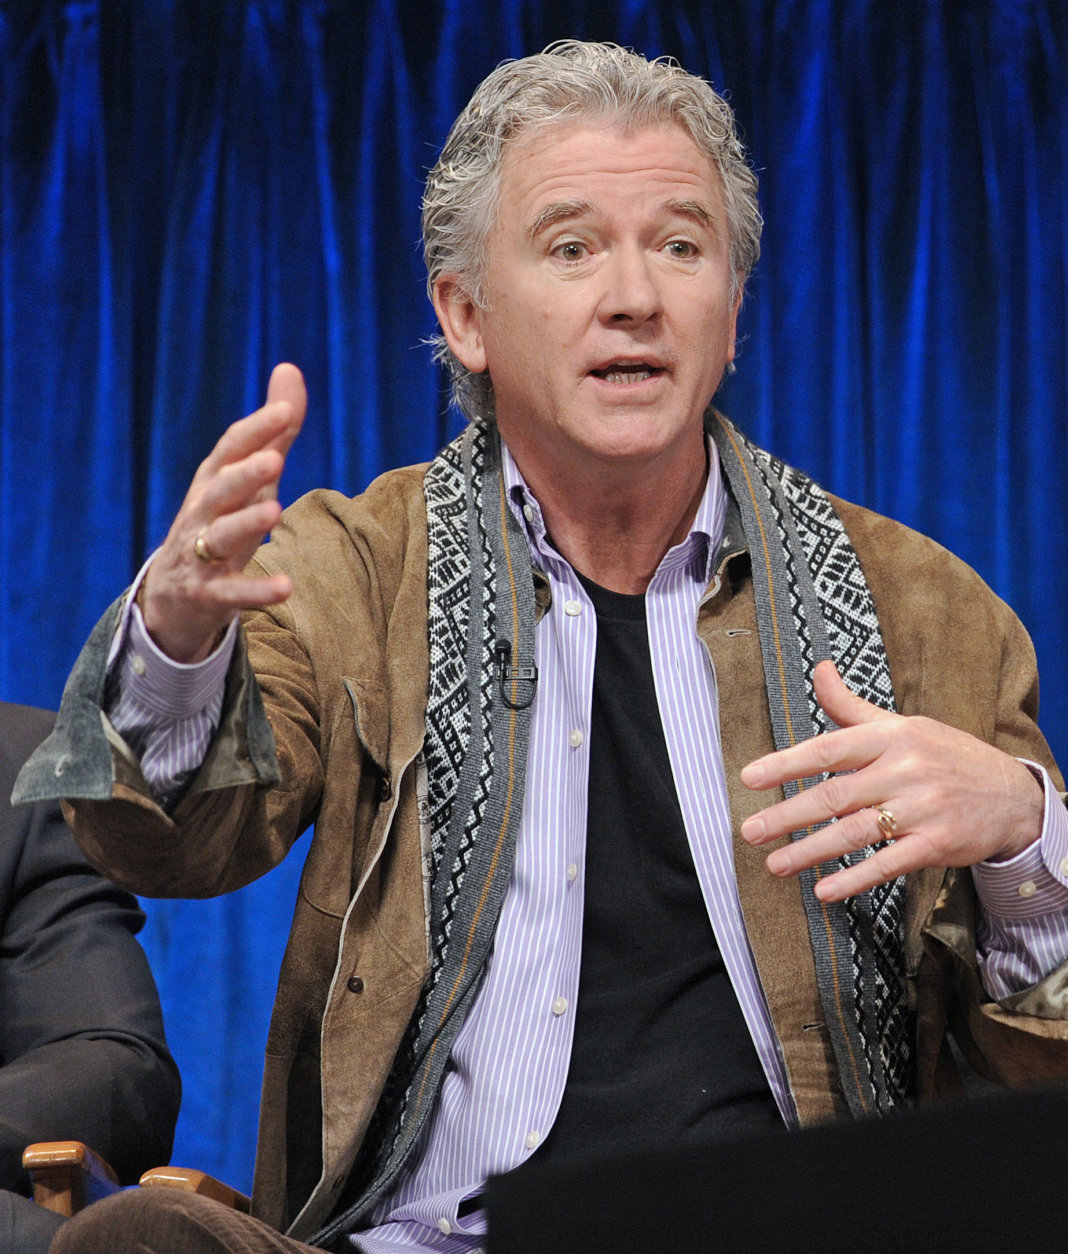 Photo of Patrick Duffy courtesy of Samsung Galaxy, taken during the Paley Center for Media's PaleyFest, honoring Dallas at the Saban Theatre, Sunday March 10, 2013 in Los Angeles, California. (Photo by Kevin Parry/Invision/AP)